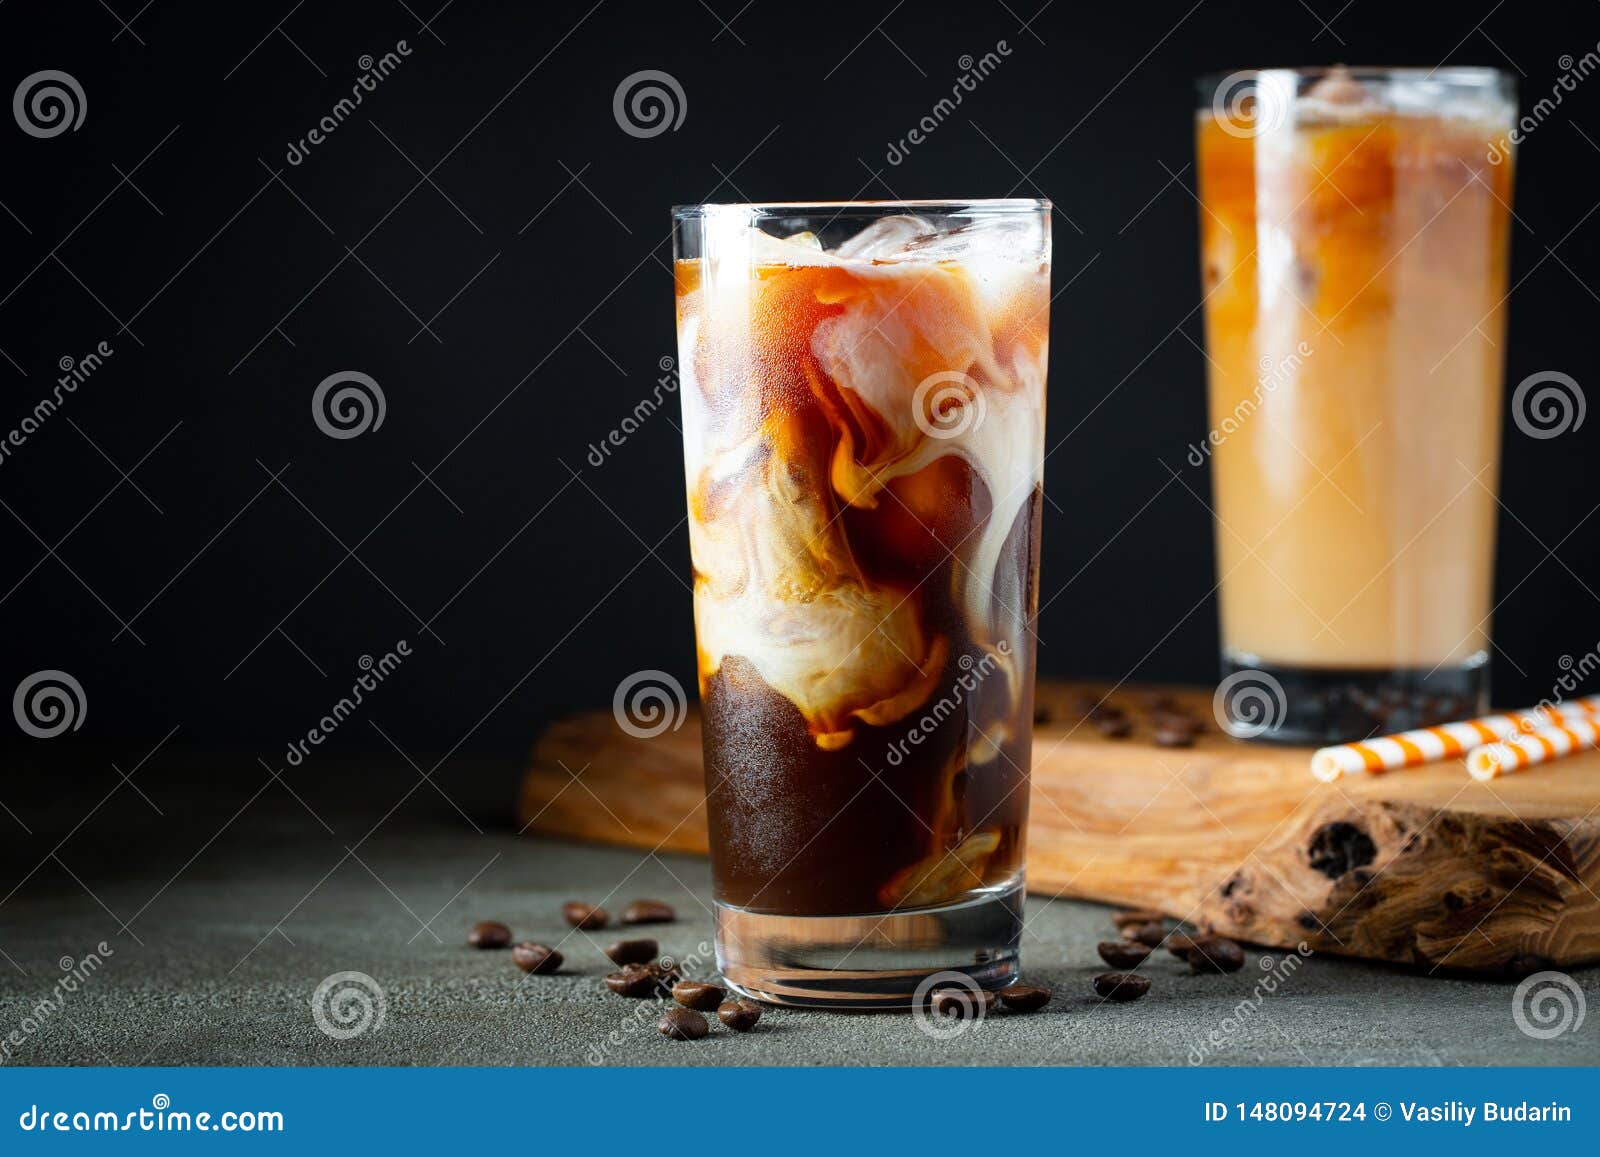 https://thumbs.dreamstime.com/z/ice-coffee-tall-glass-cream-poured-over-ice-cubes-beans-old-rustic-wooden-table-cold-summer-drink-ice-coffee-148094724.jpg